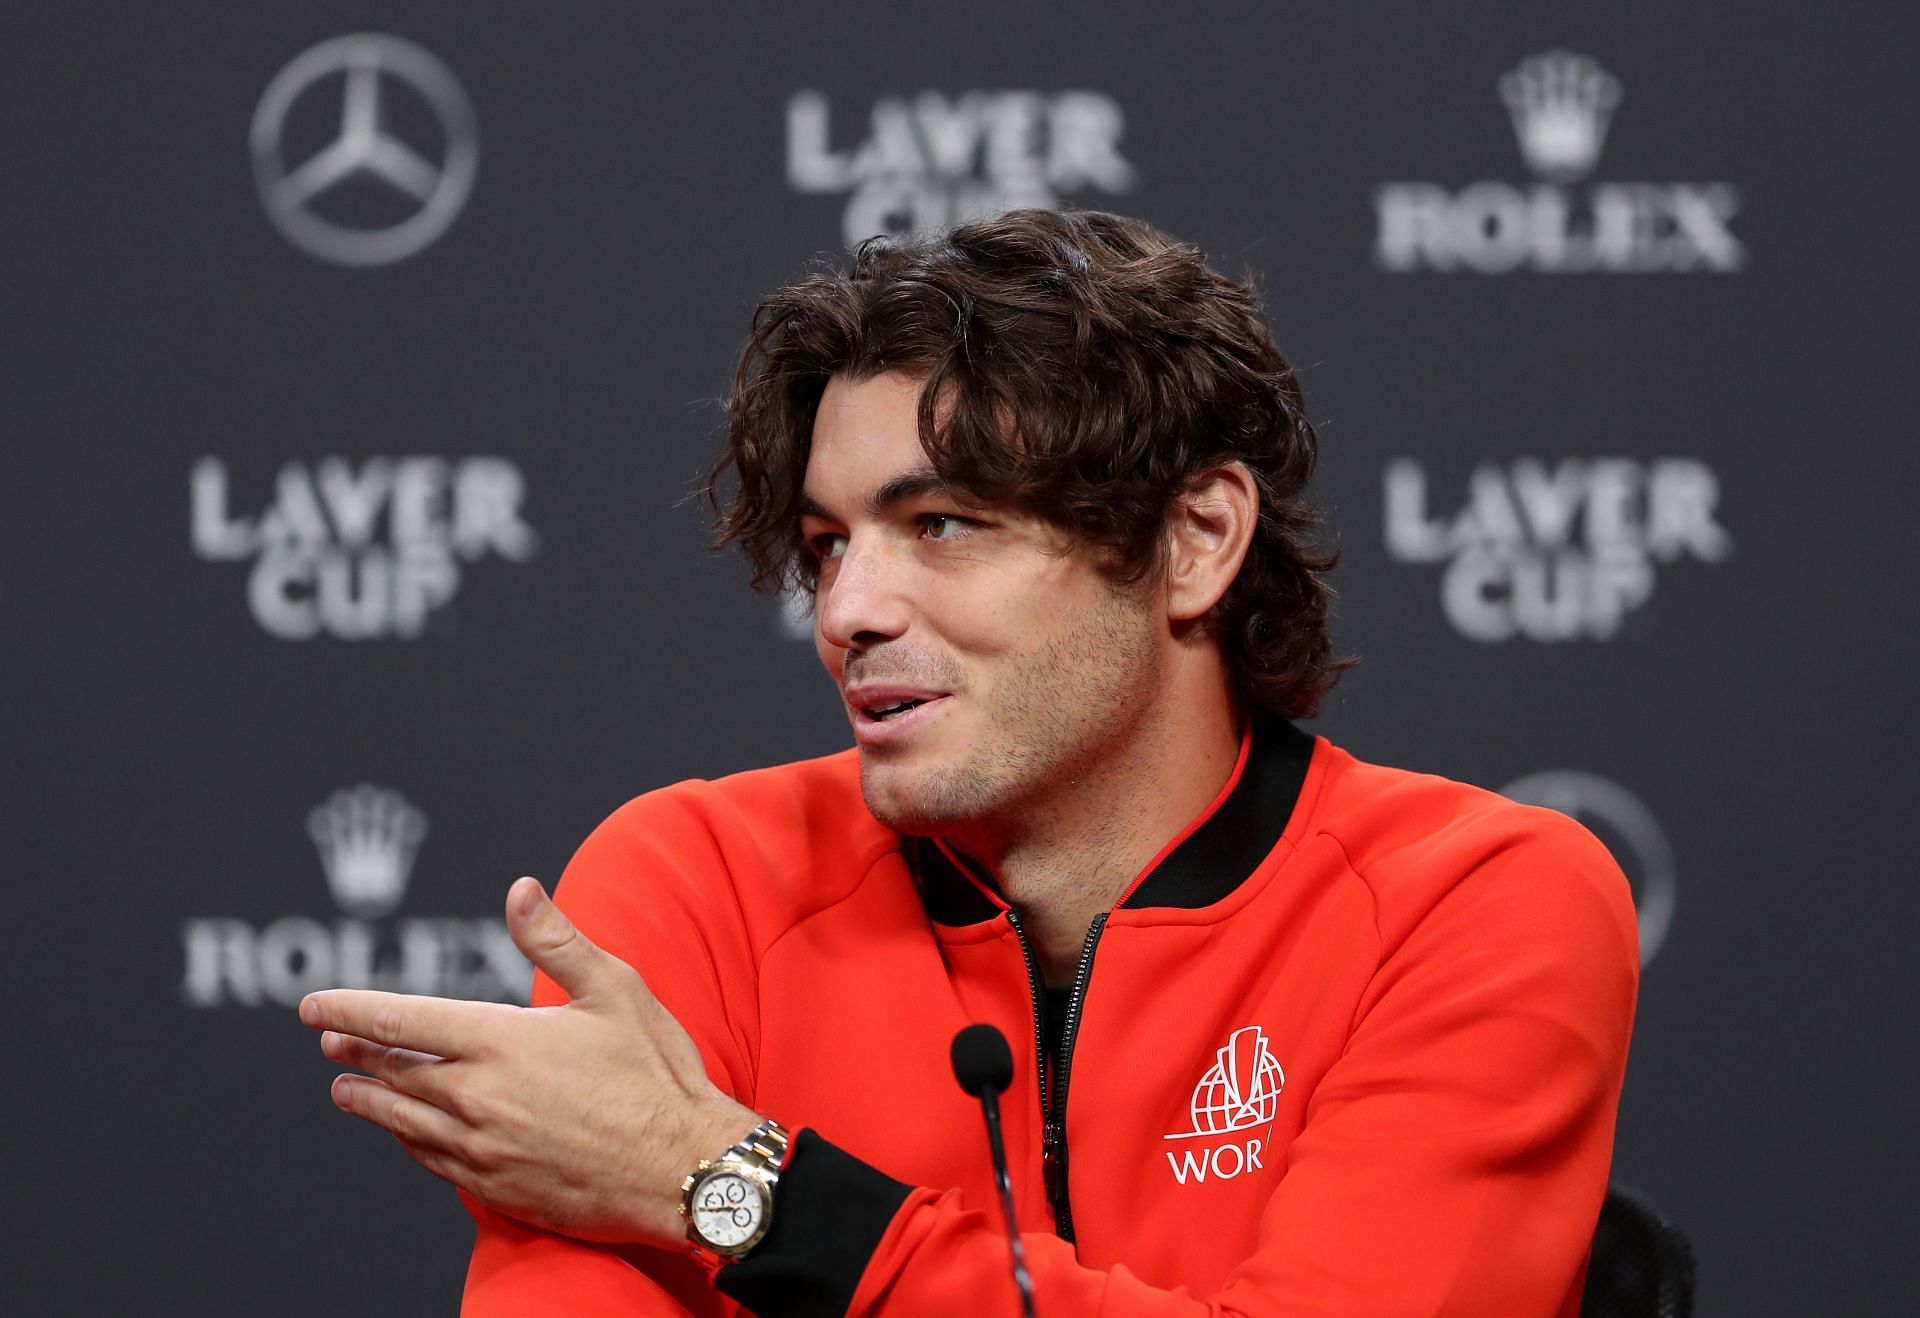 Taylor Fritz speaking at a press conference at the 2022 Laver Cup.